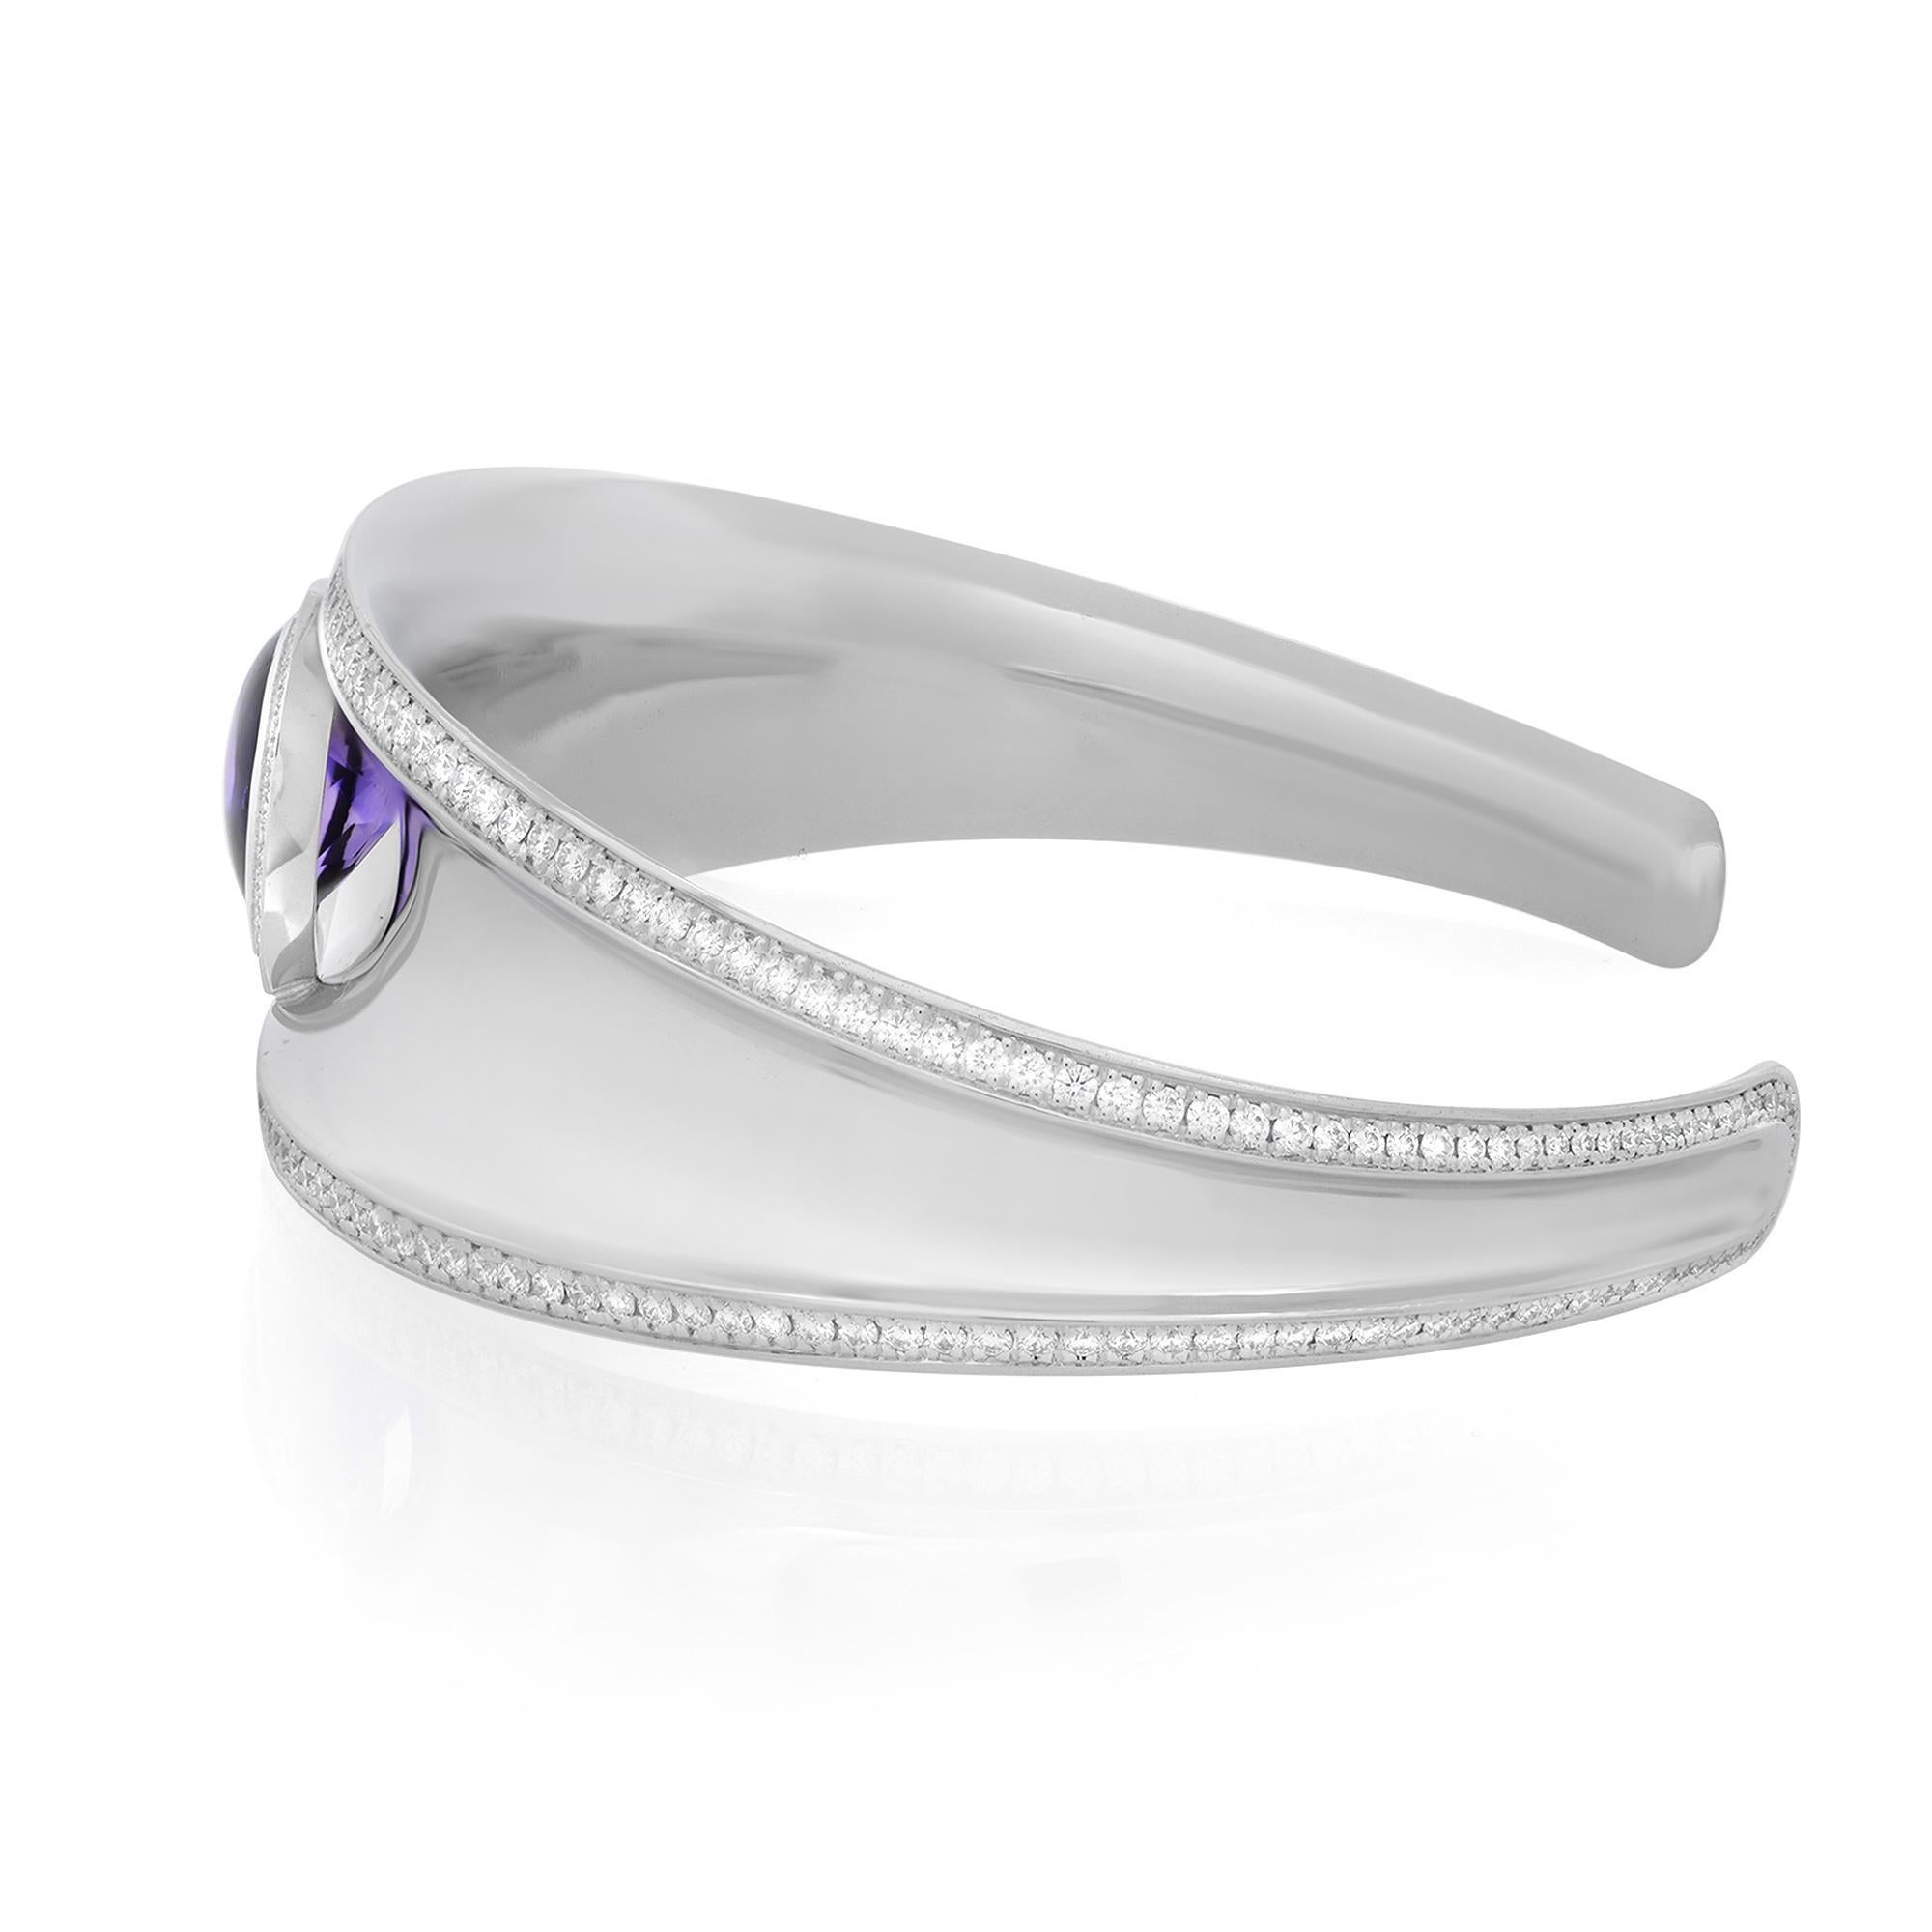 Presenting bold and chic Chopard Imperiale purple Amethyst and diamond cuff bracelet. Crafted in high polished 18K white gold. This beautiful statement piece features a pear shaped Cabochon Amethyst weighing 2.38cttw and bright dazzling pave set 276